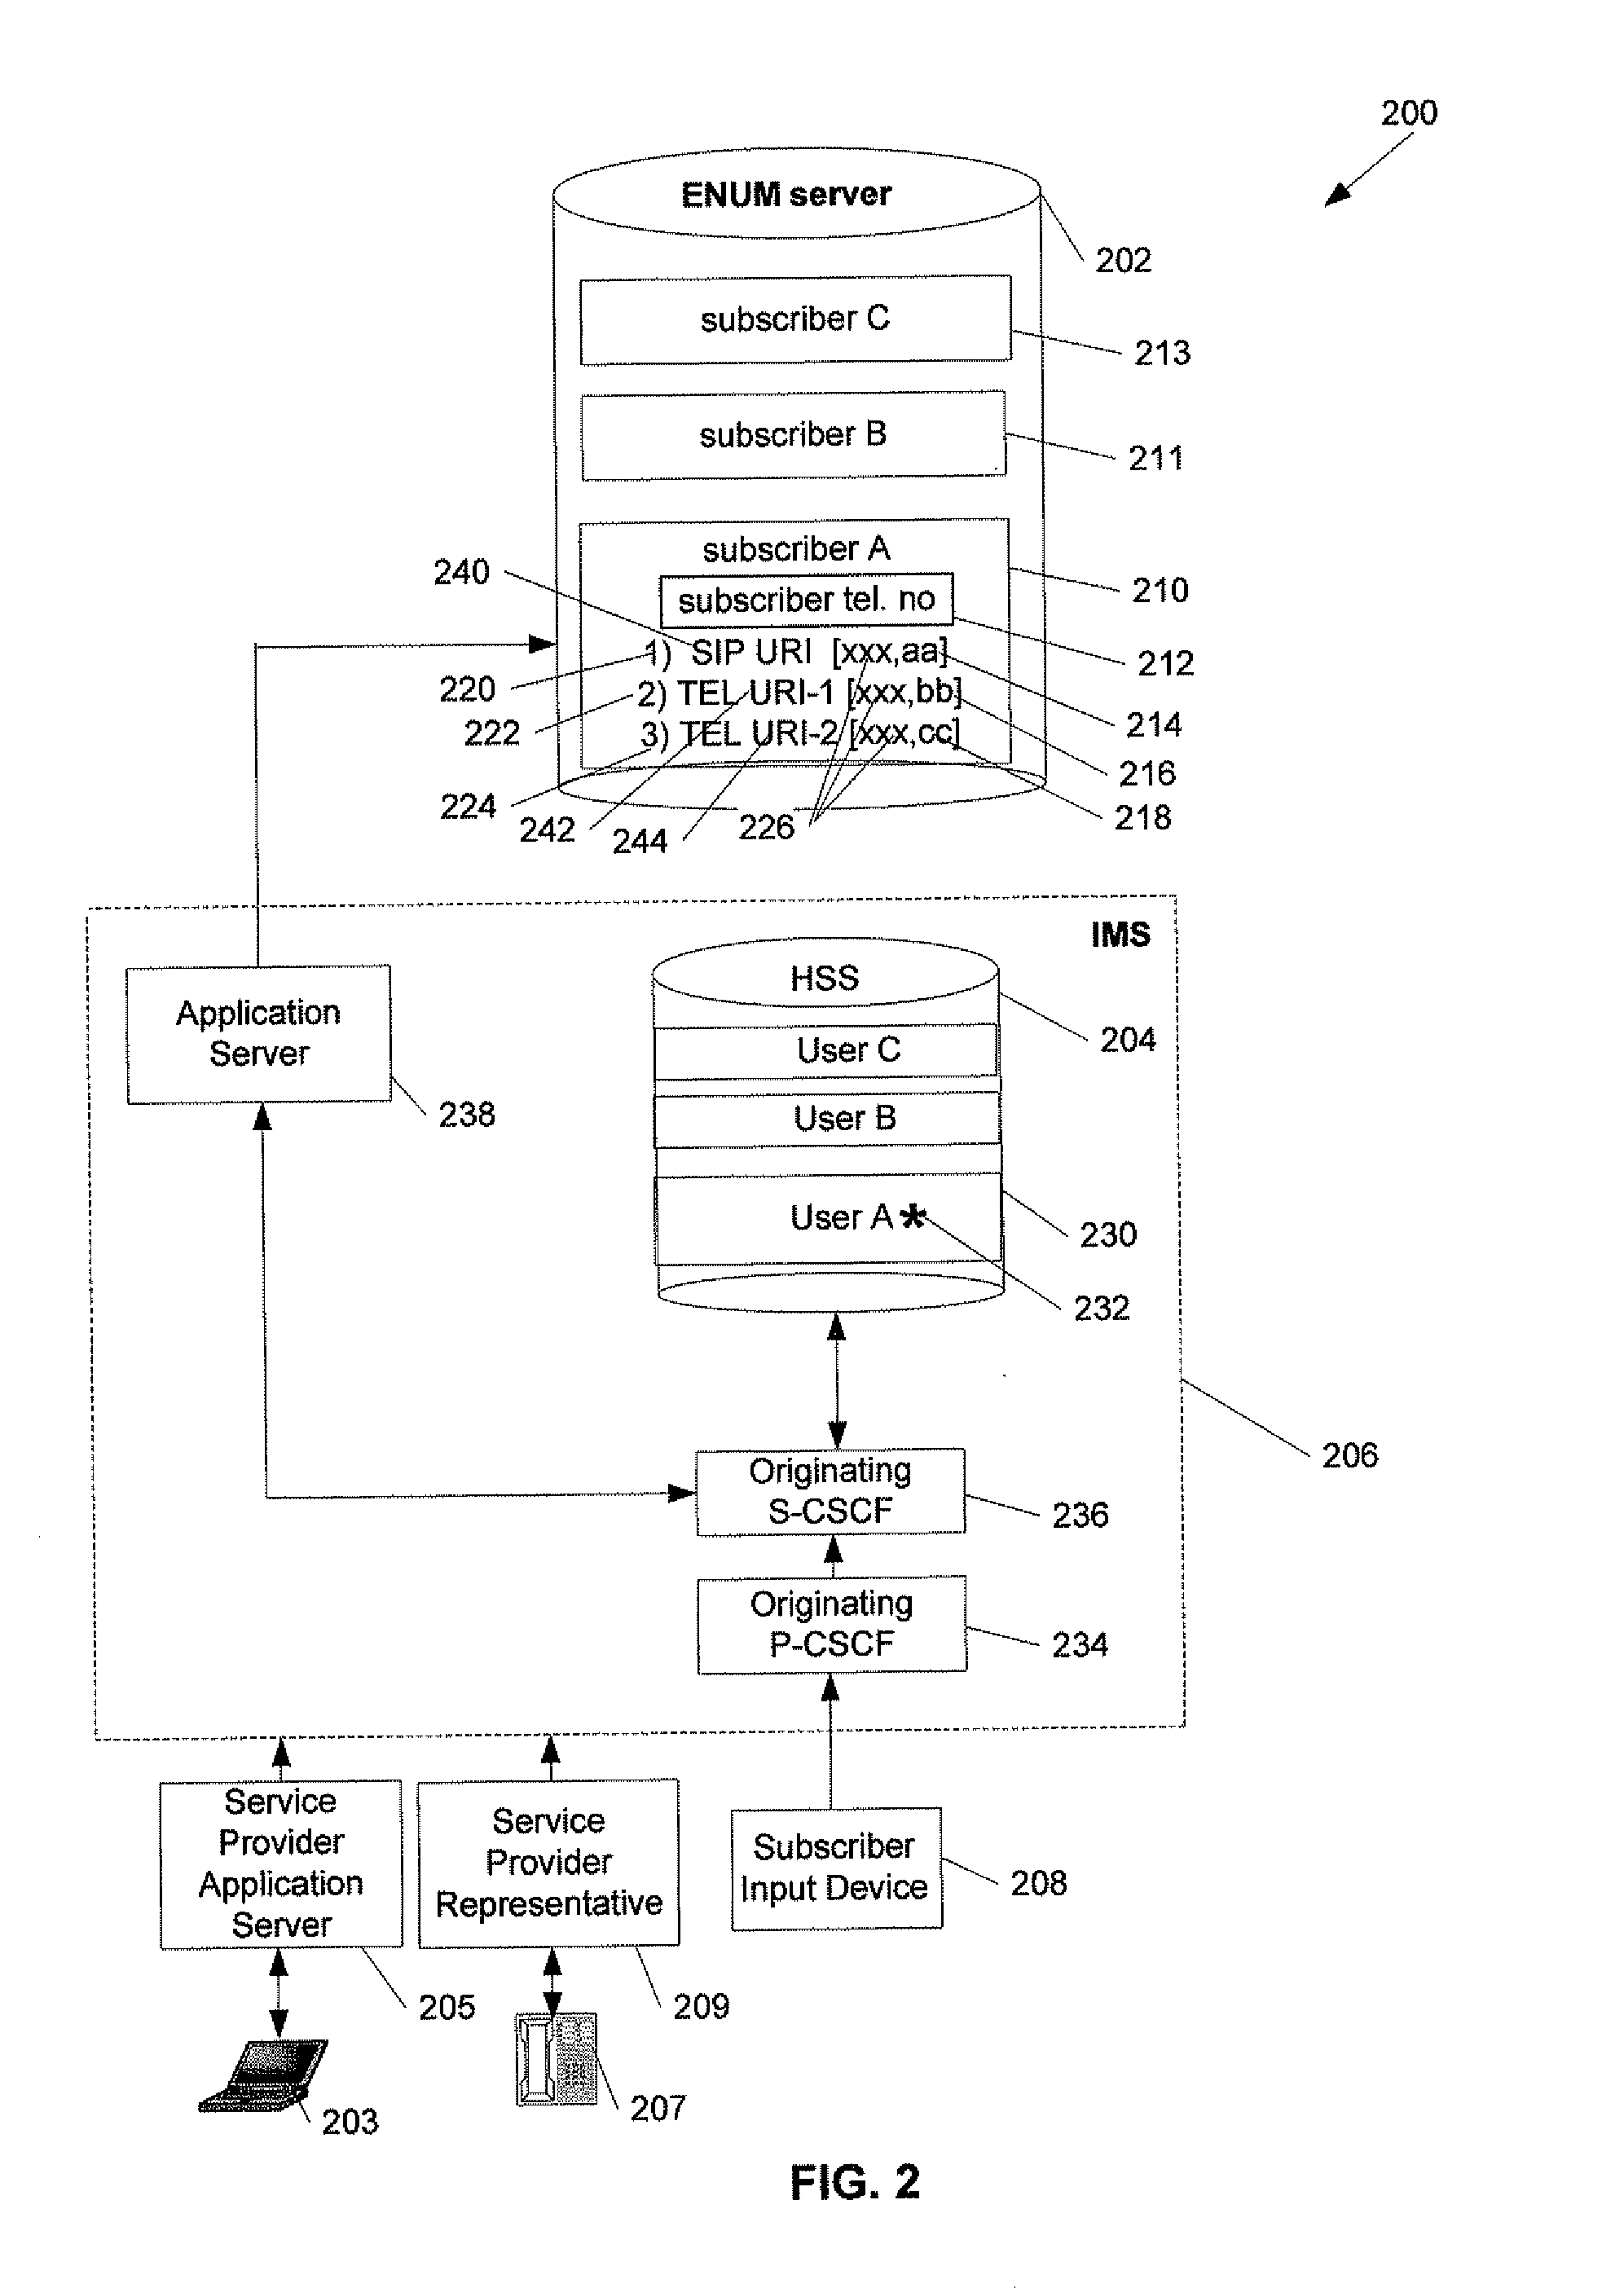 Method and System to Provide Contact Services in a Communication Network